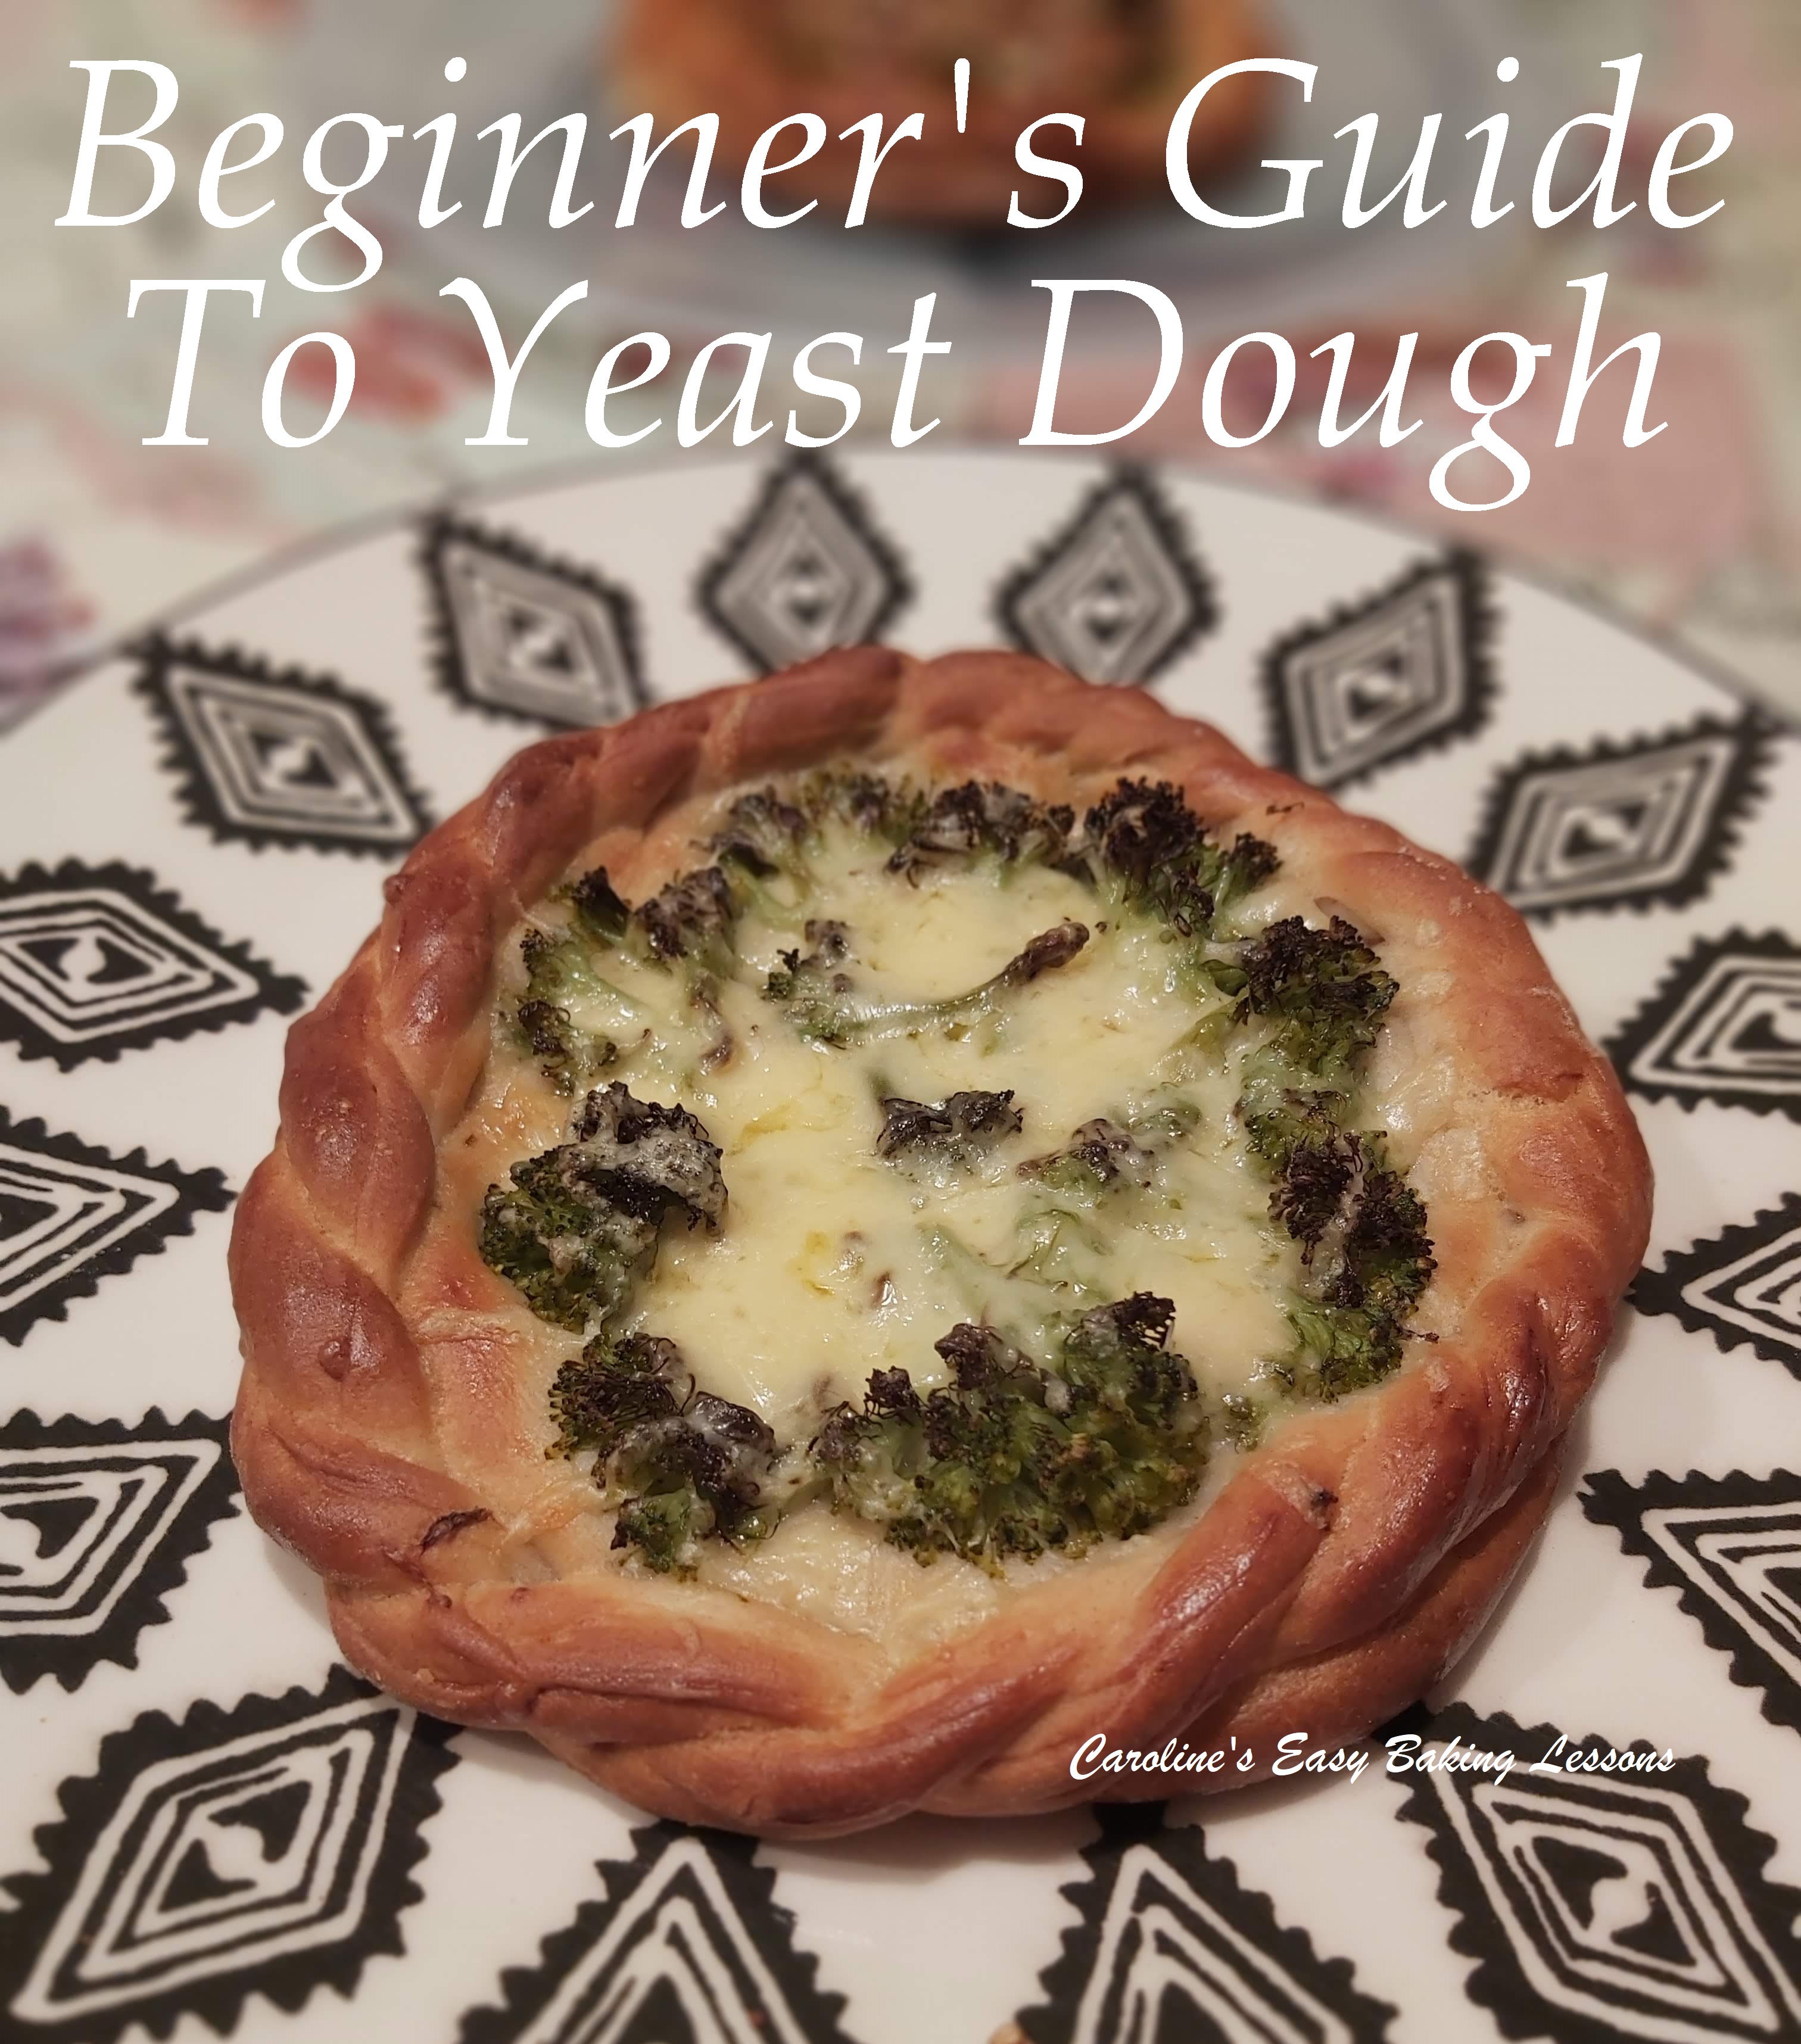 QUICK GUIDE FOR BEGINNERS TO WORKING WITH YEAST DOUGH – Part 1